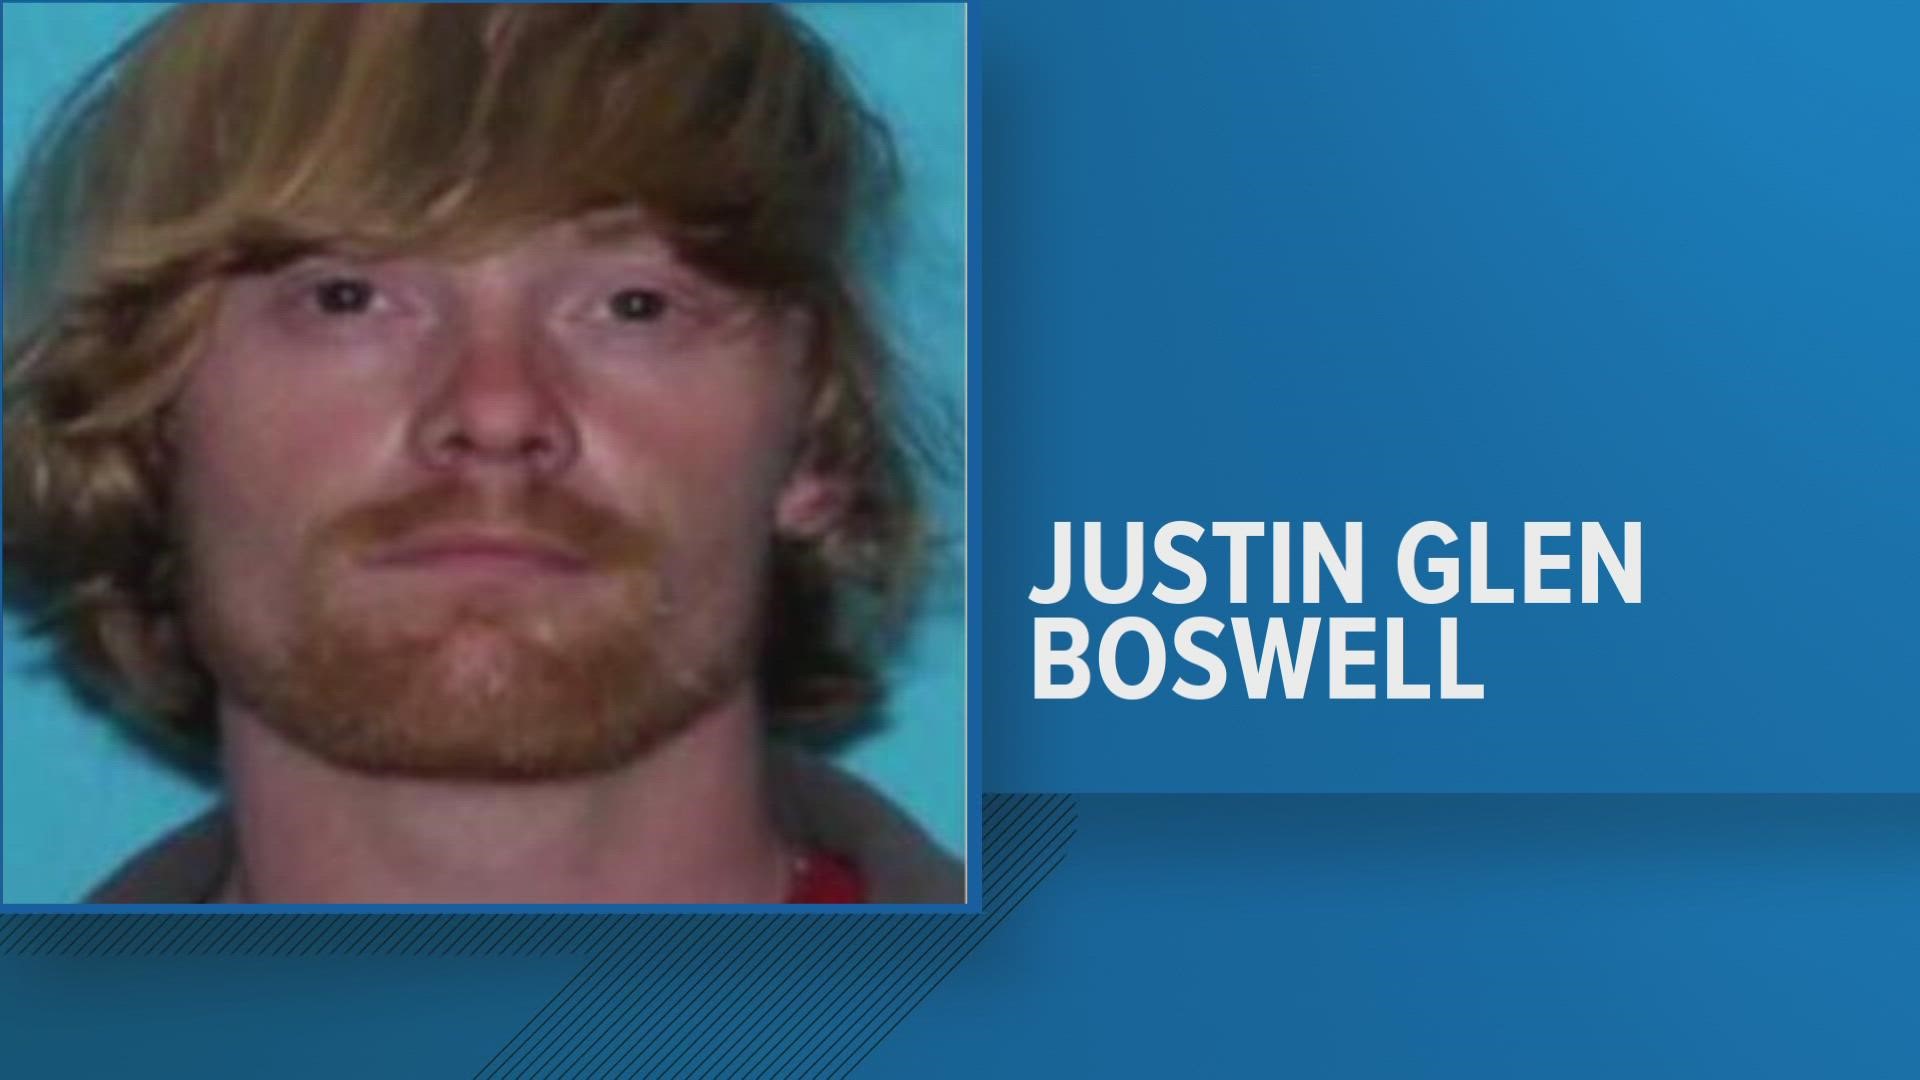 Temple Police Department now has an active murder warrant for 31-year-old Justin Glen Boswell in connection to the stabbing death of 25-year-old Rowdy Mays.